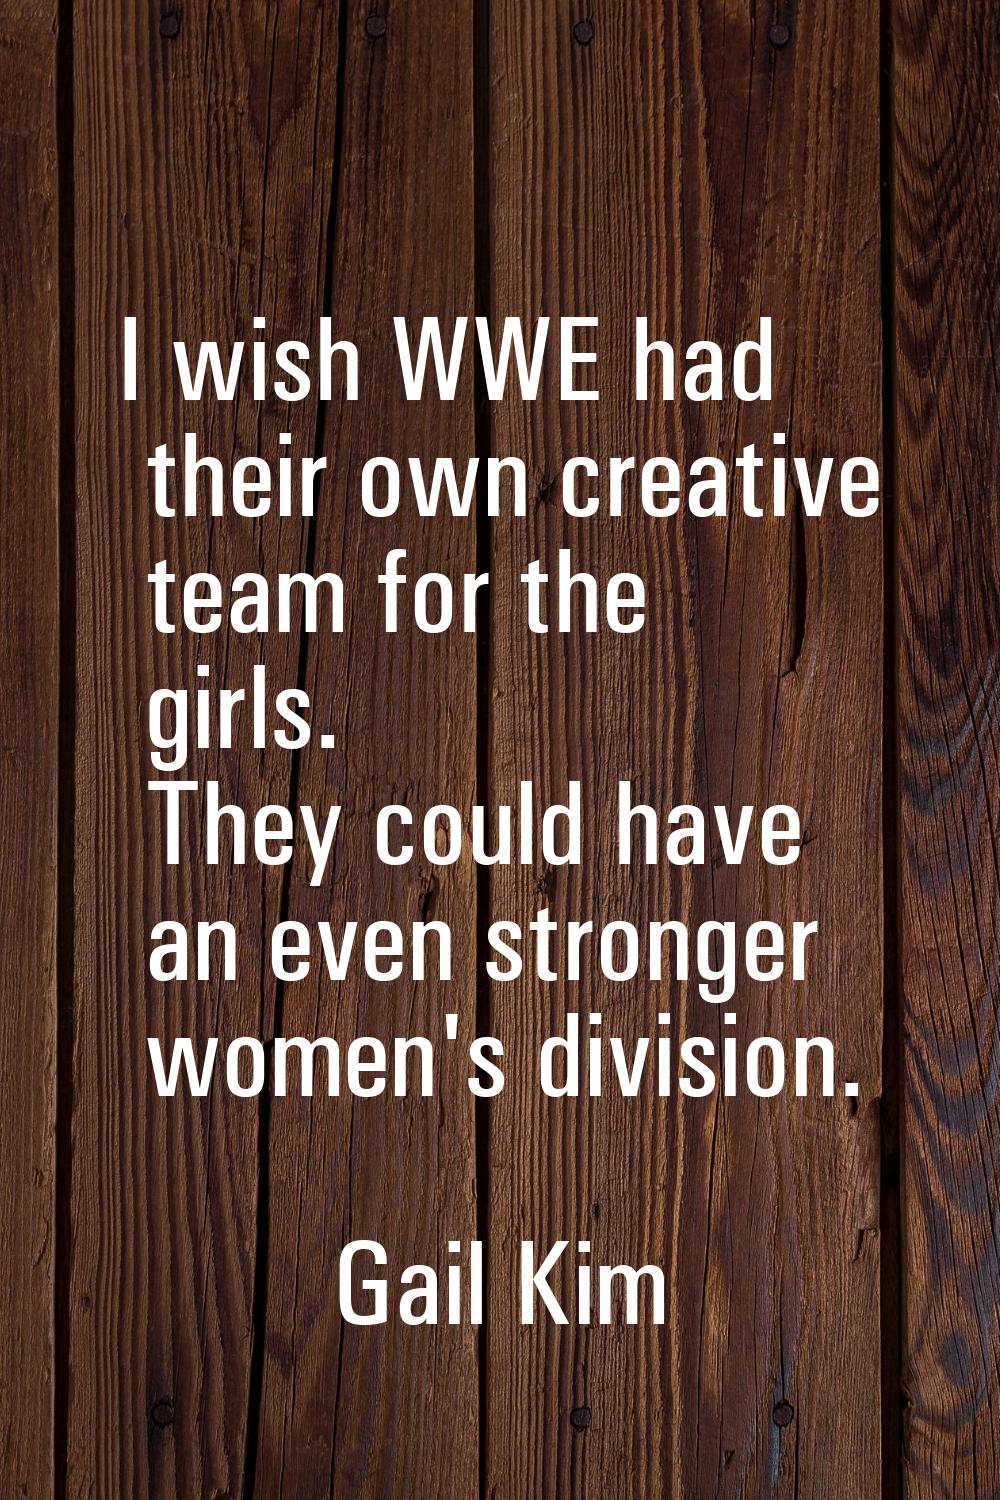 I wish WWE had their own creative team for the girls. They could have an even stronger women's divi